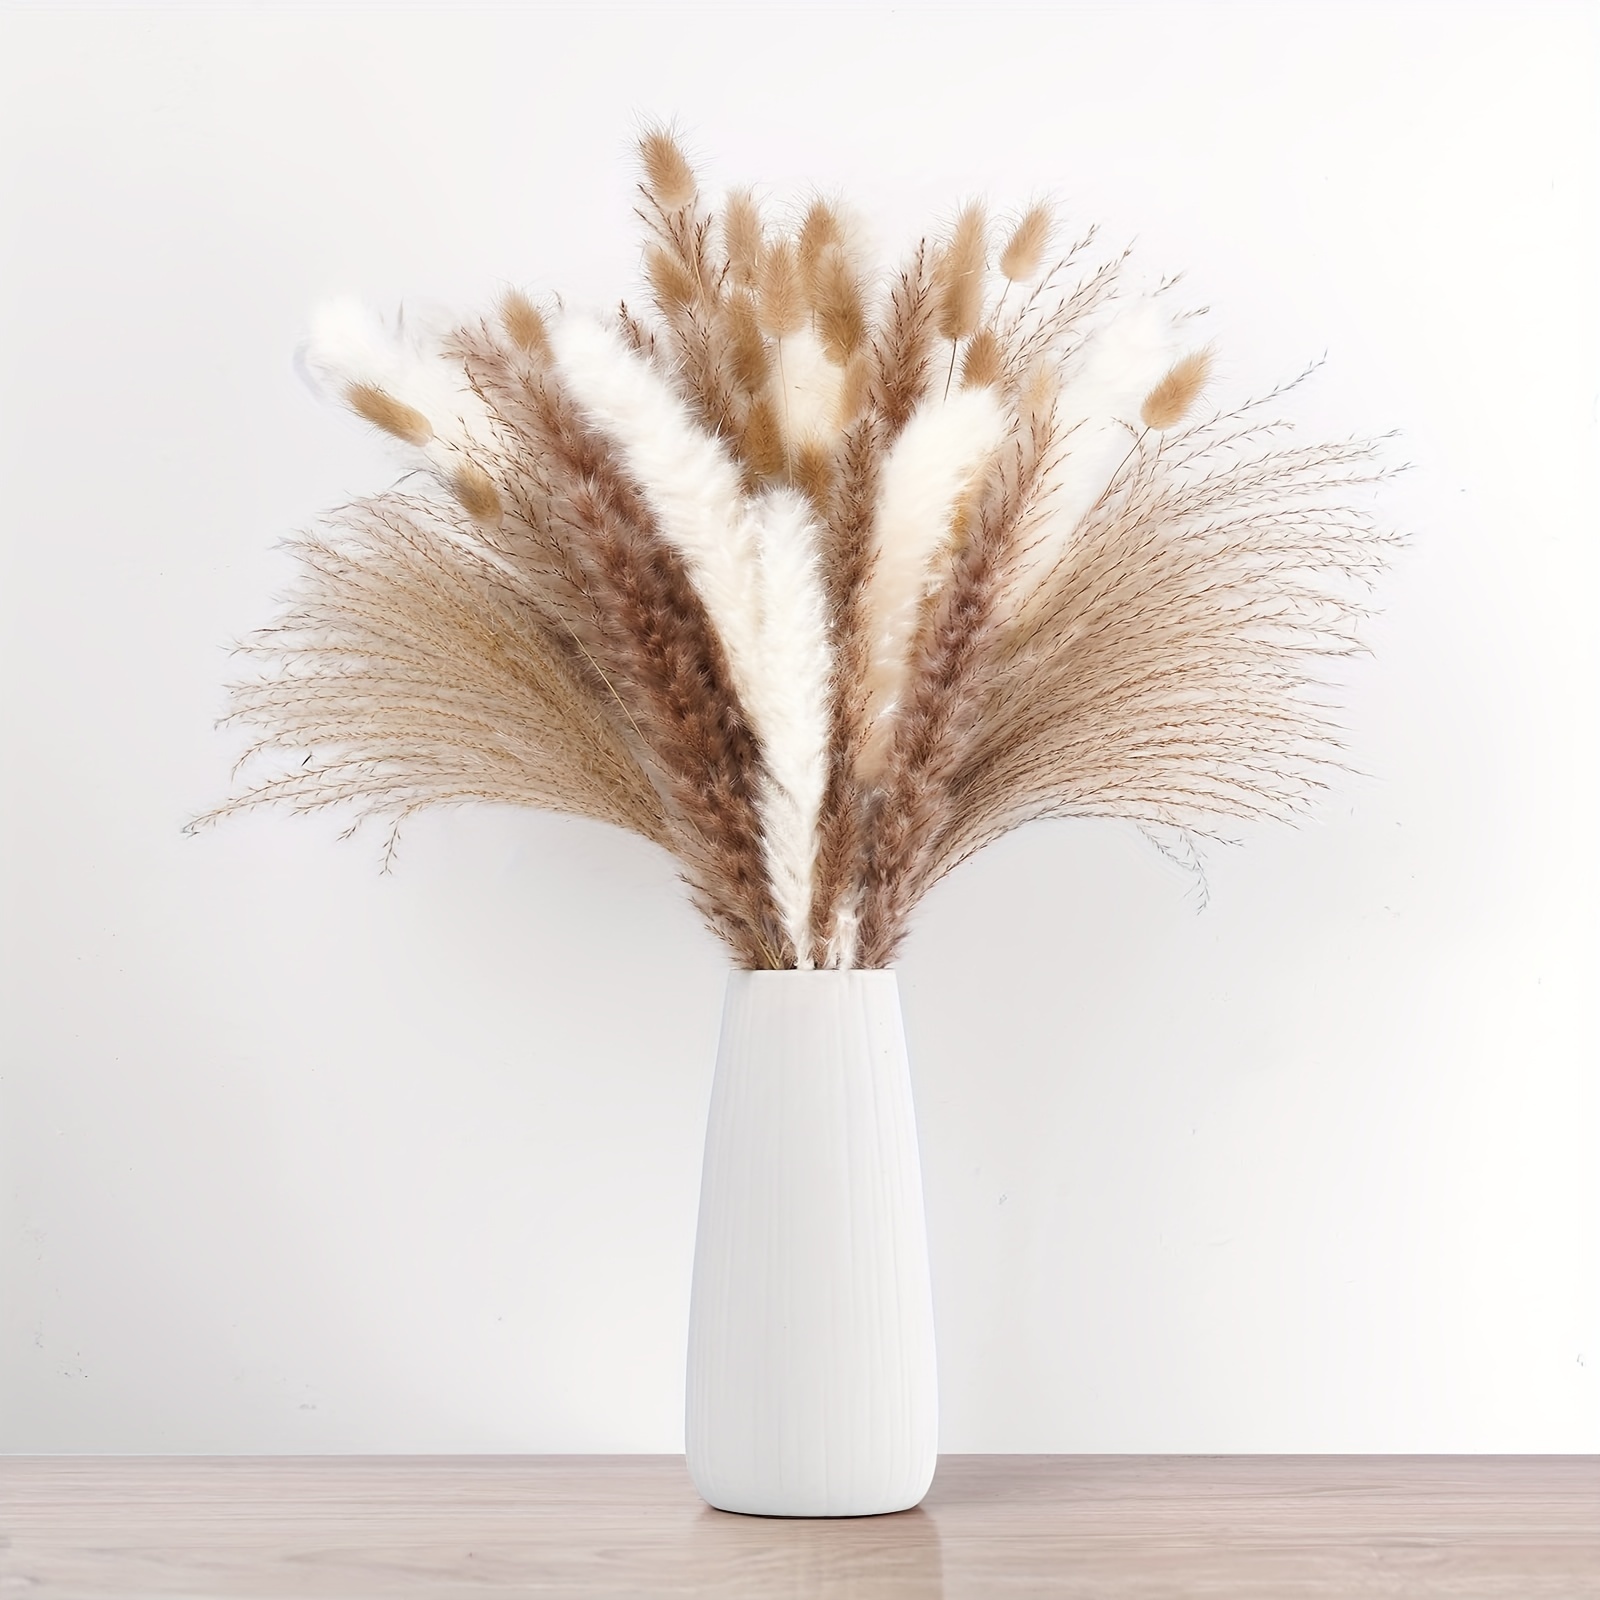 Feathers for Vase - 3 46 Large Pampas Grass Decor Tall - Dried Pampas Grass Vase - Boho Plants - Pompas Decorativas Tall - Fluffy Pampas Grass